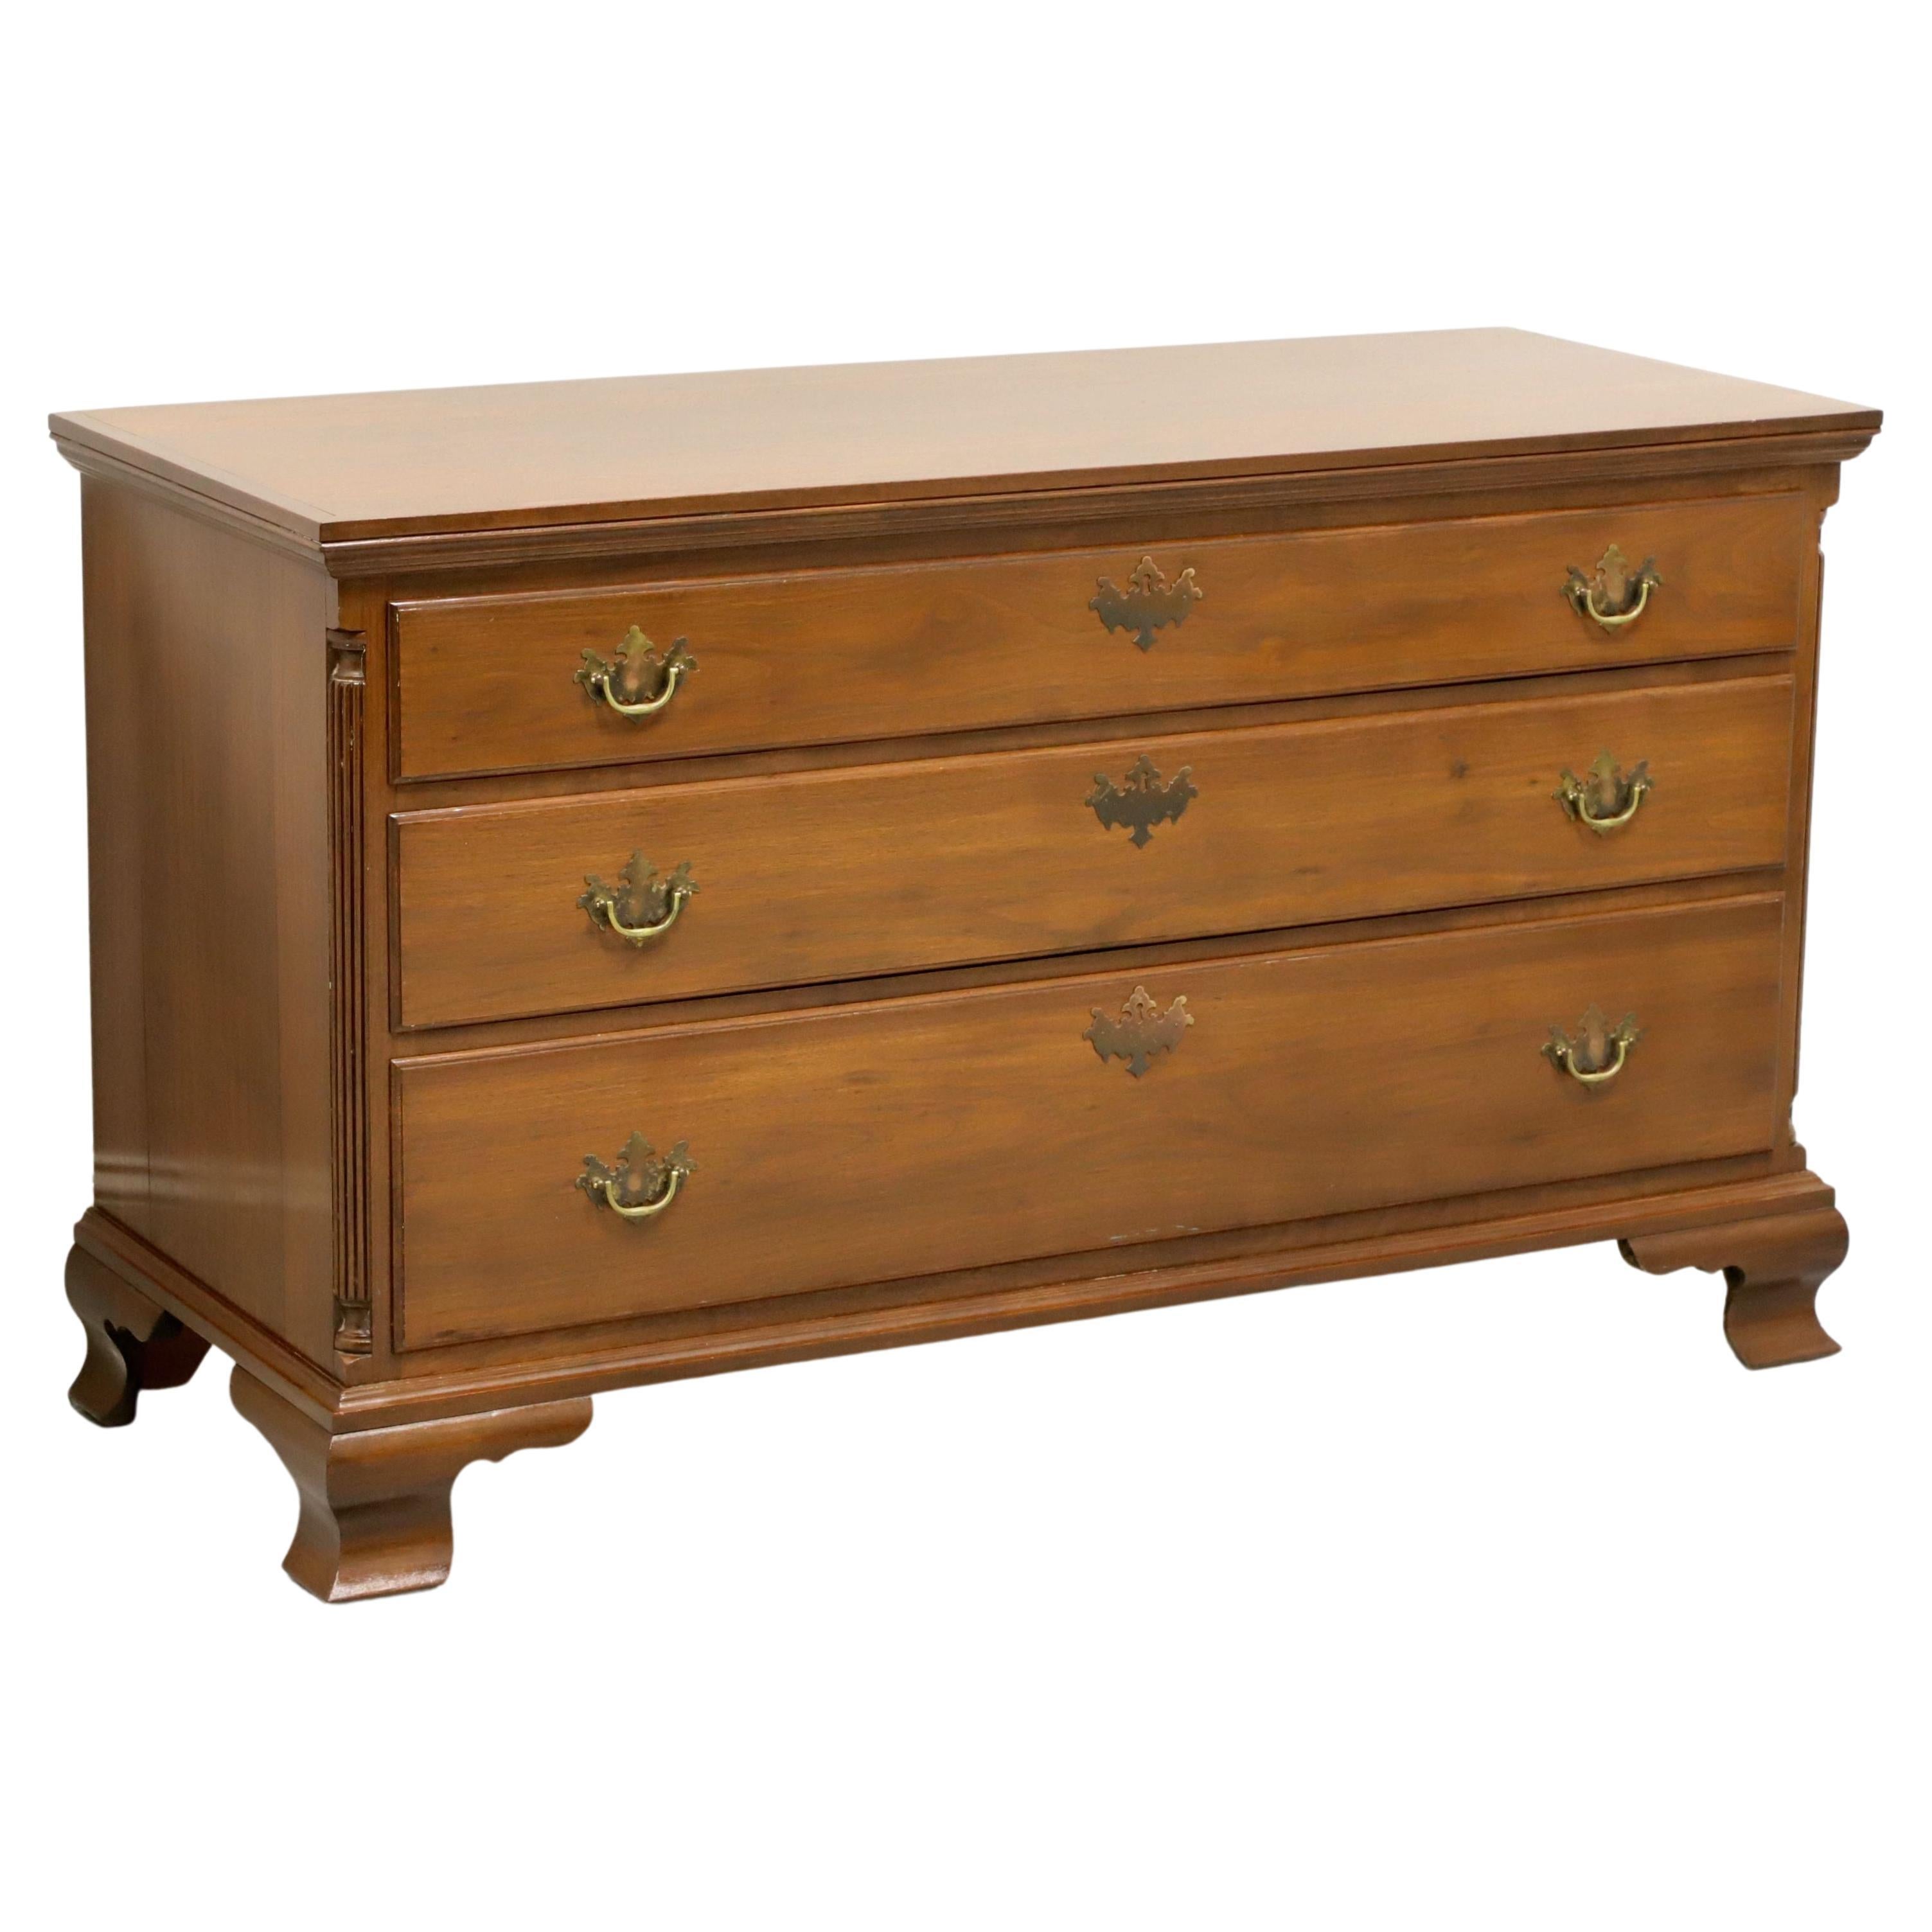 McSWAIN'S Handcrafted Walnut Chippendale Style Dresser For Sale